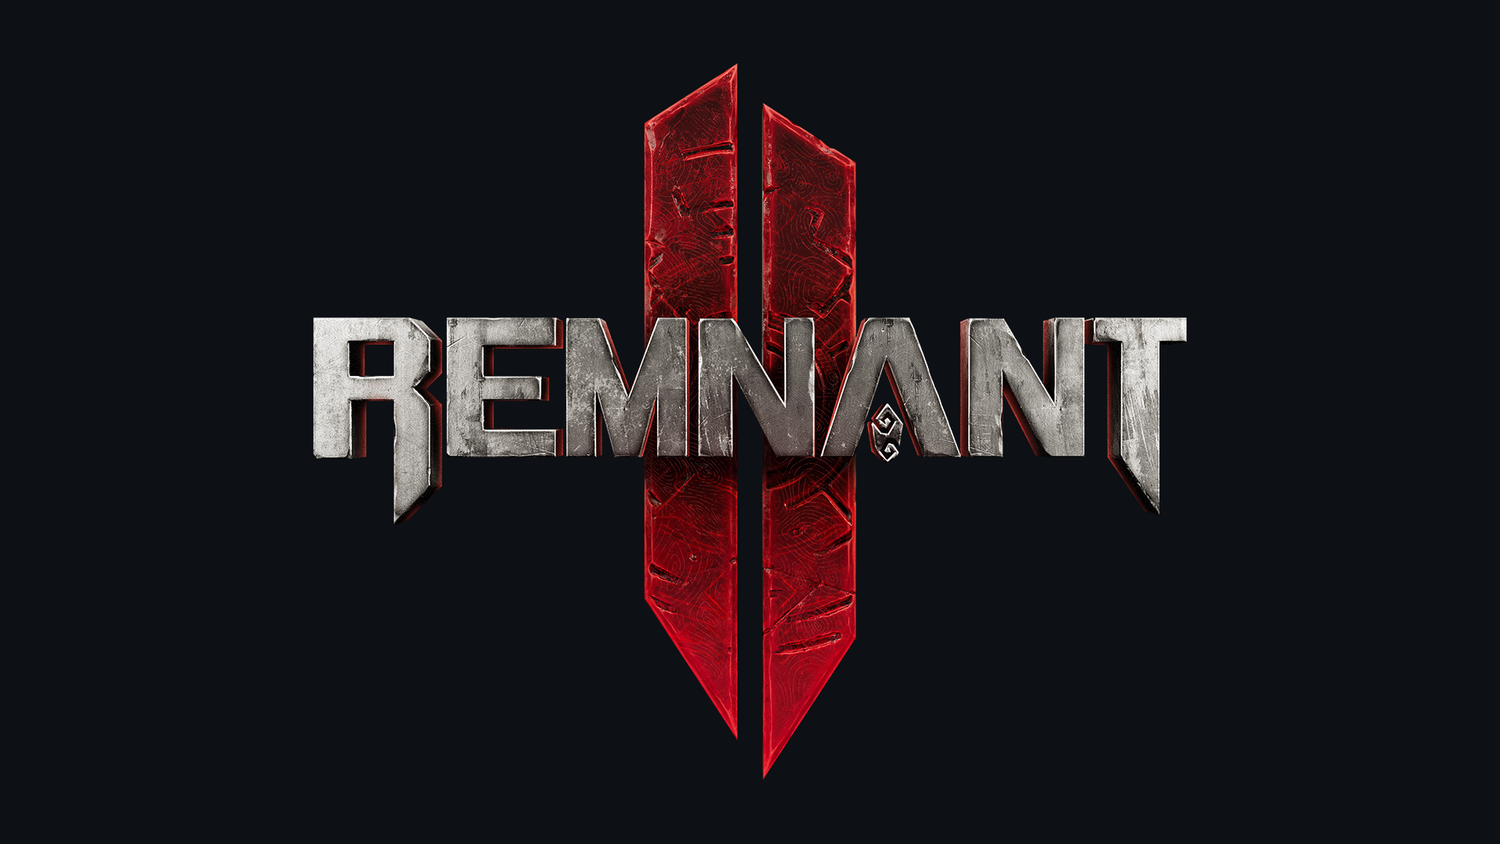 Remnant 2 The Awakened King DLC: All New Weapons List